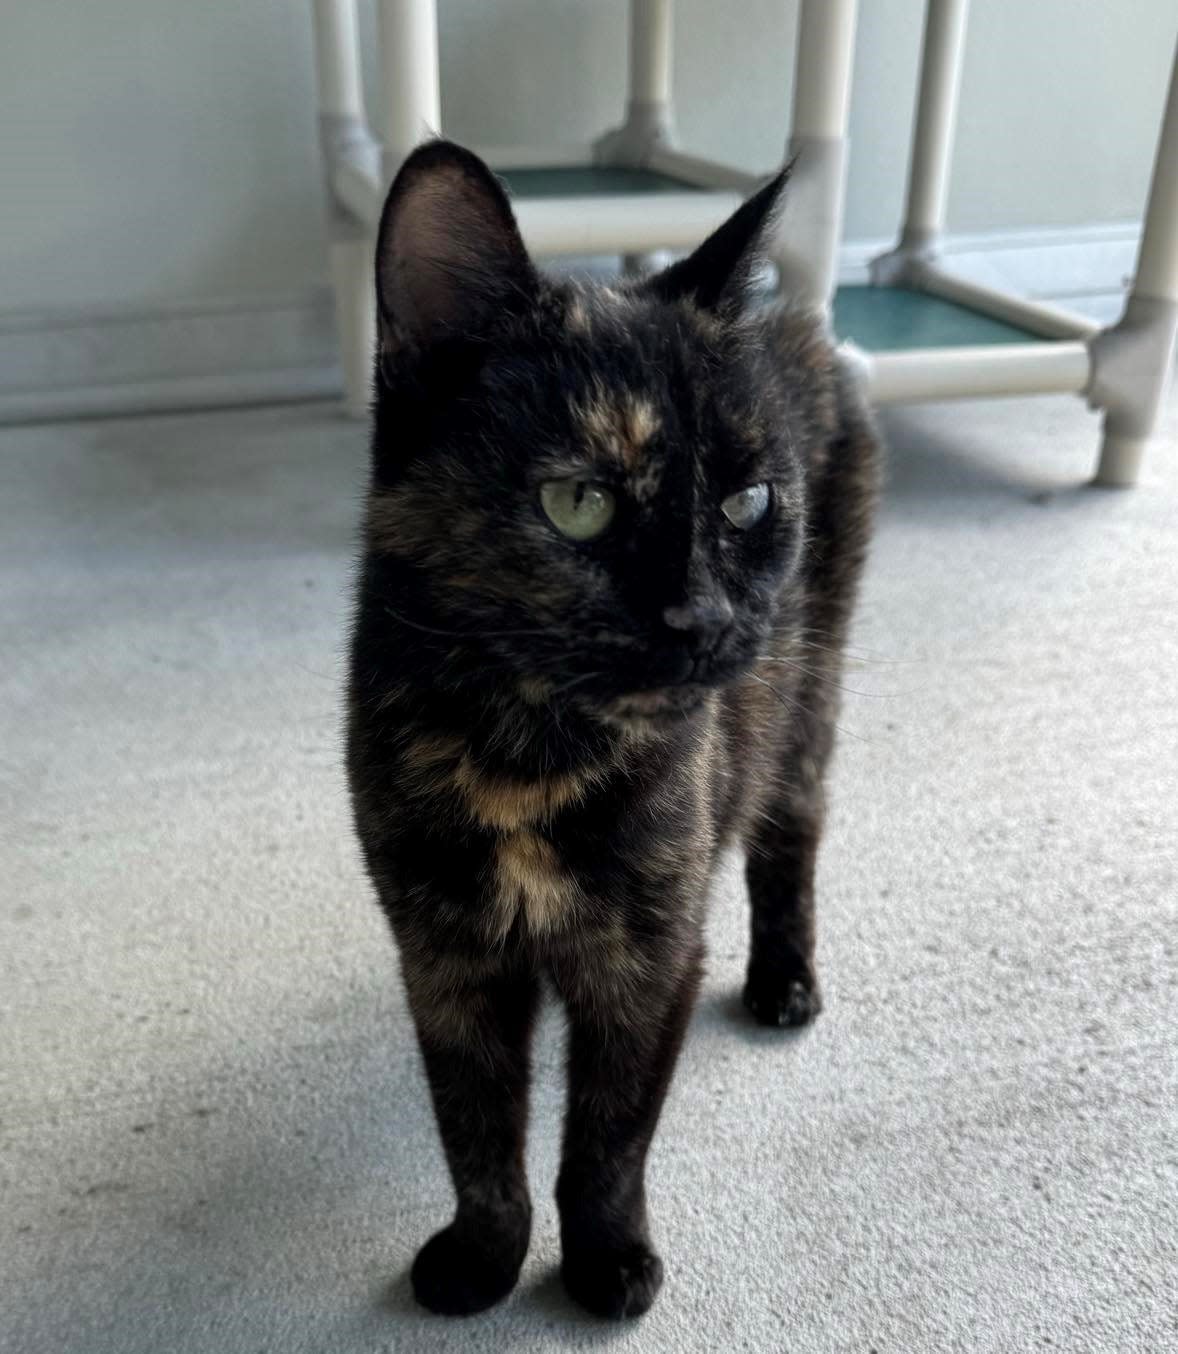 Emily is a 14-year-old cat in need of a new home.